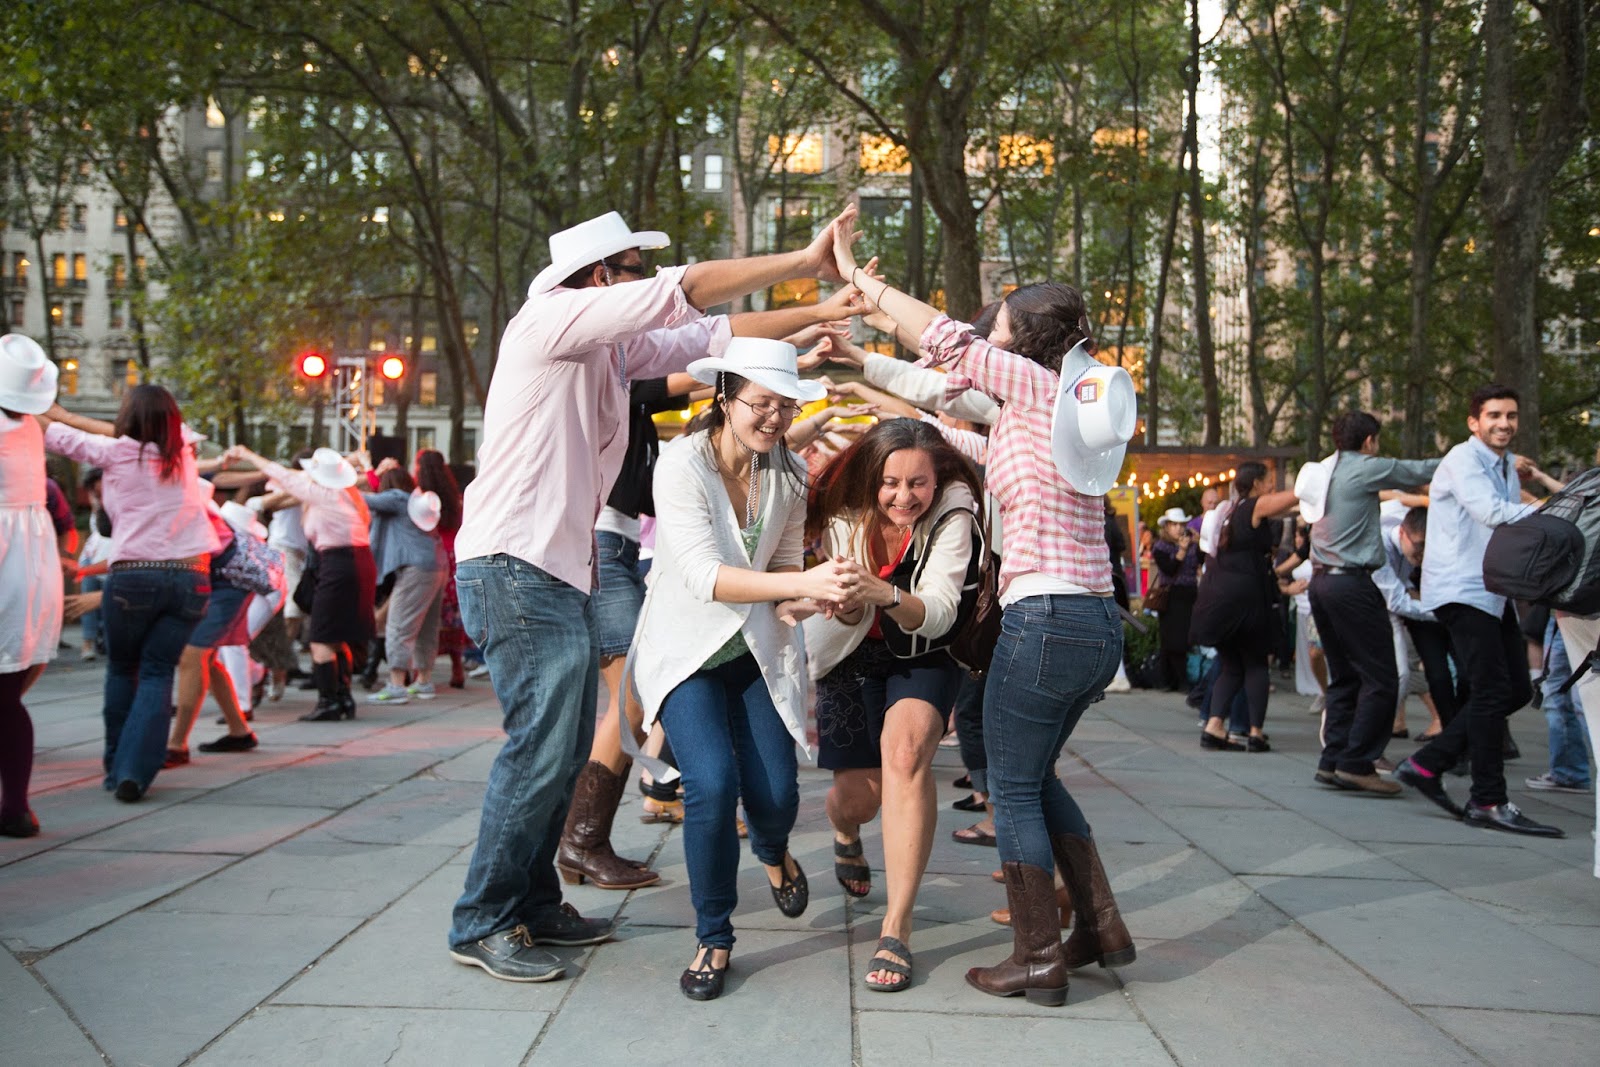 Bryant Park Square Dance - 09.10.12 - Photo by Angelito Jusay (1).jpg